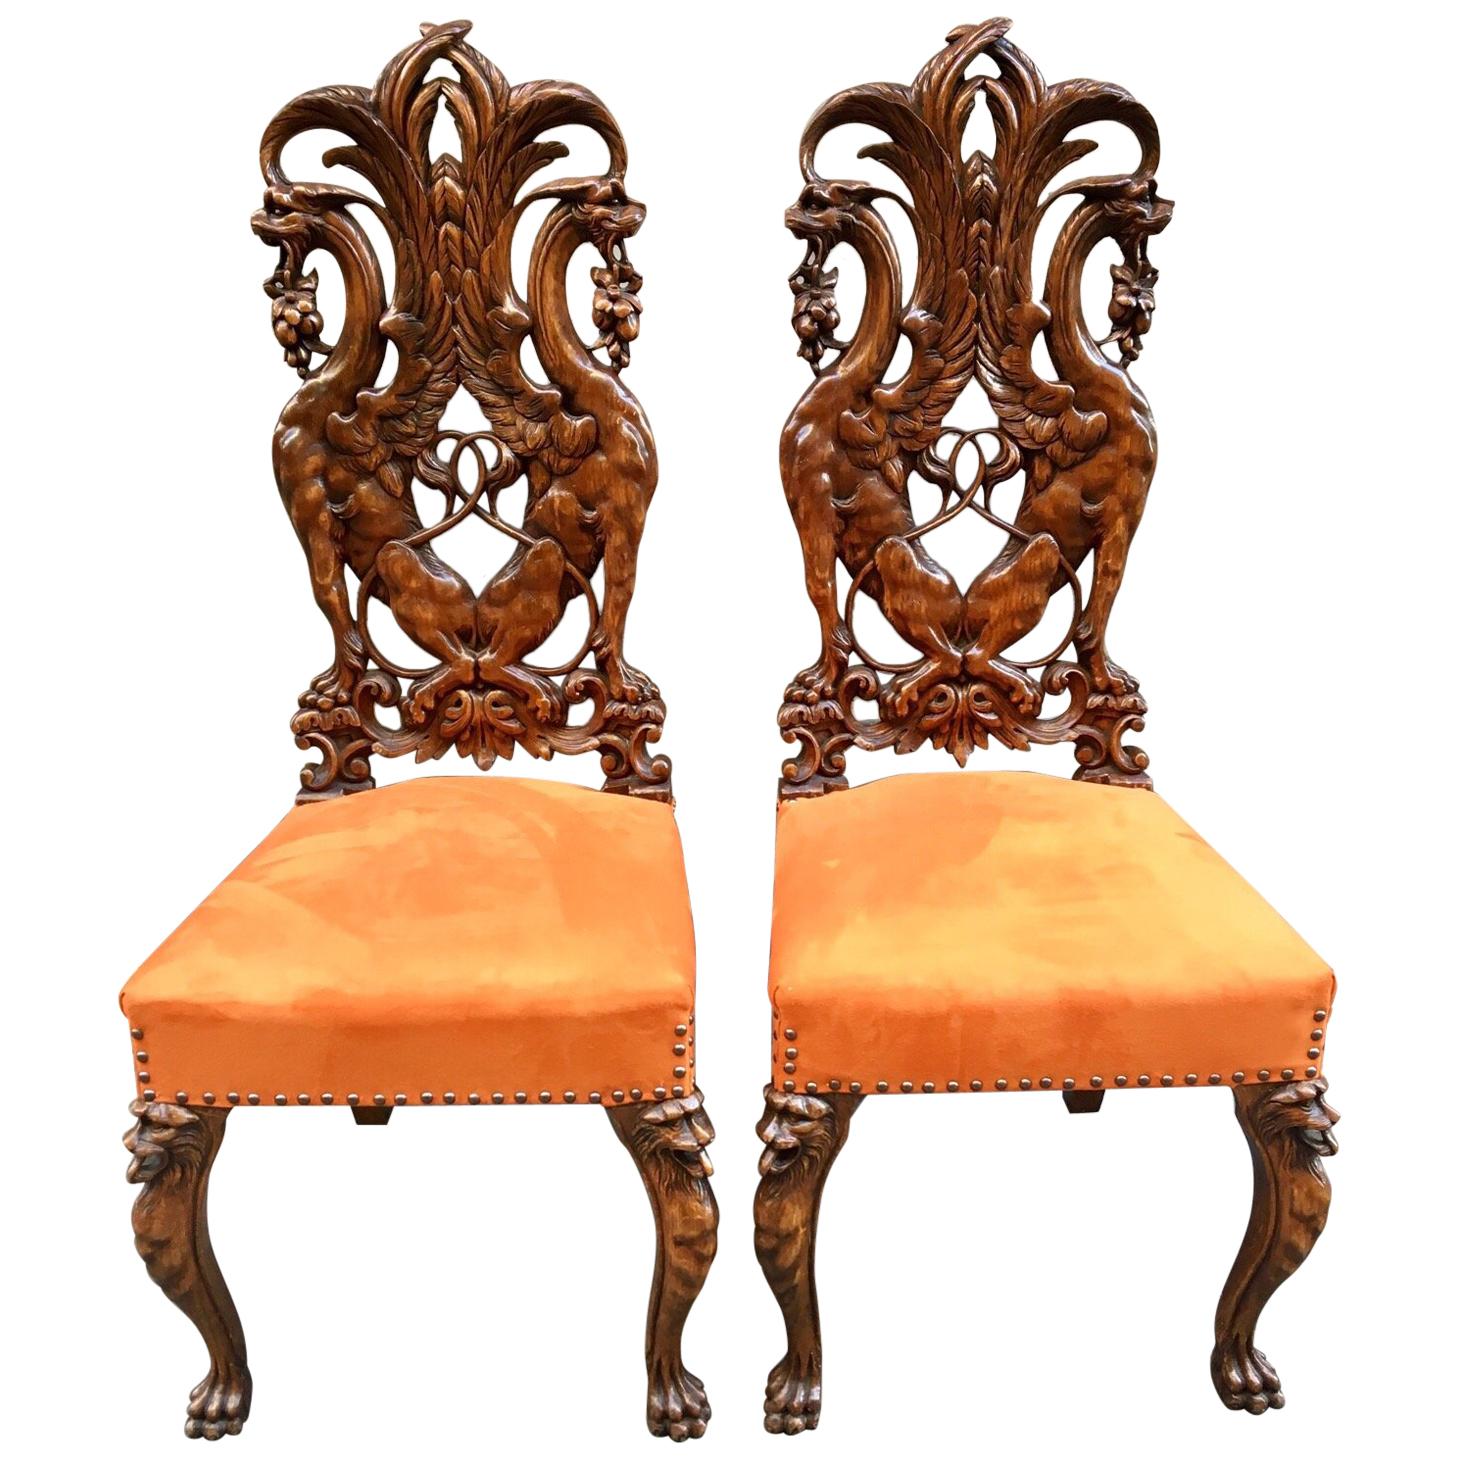 Pair of Carved Renaissance-Style Wooden Chairs Orange Alcantara Seat, Early 1900